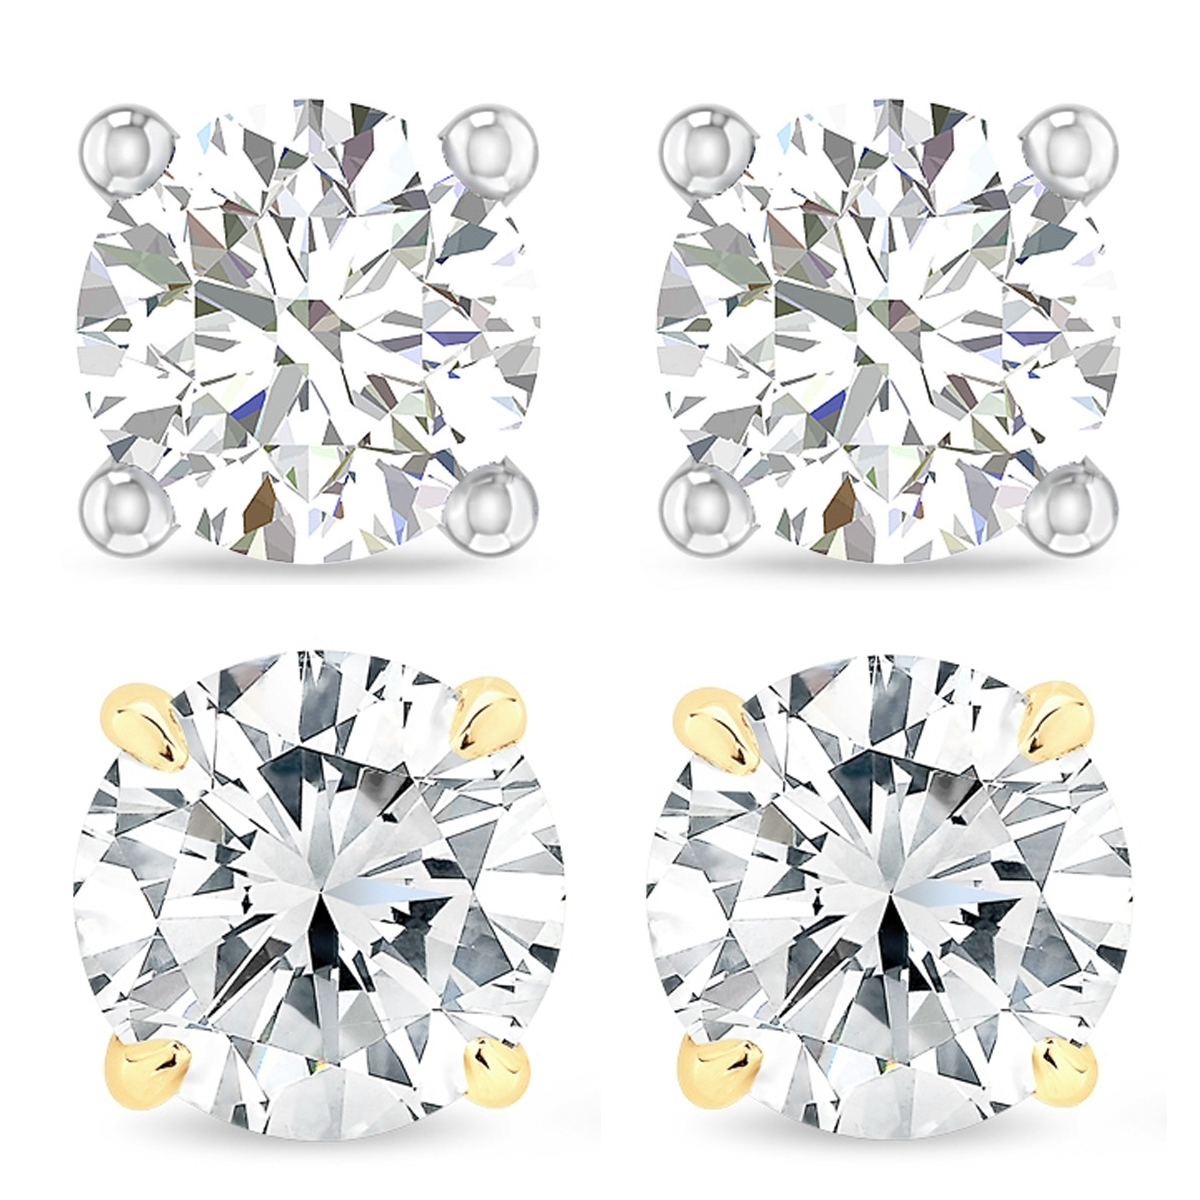 Bonjour Jewelers 10k White and yellow Gold 2Ct 4 Prong Solitaire Diamond Stud Earrings.